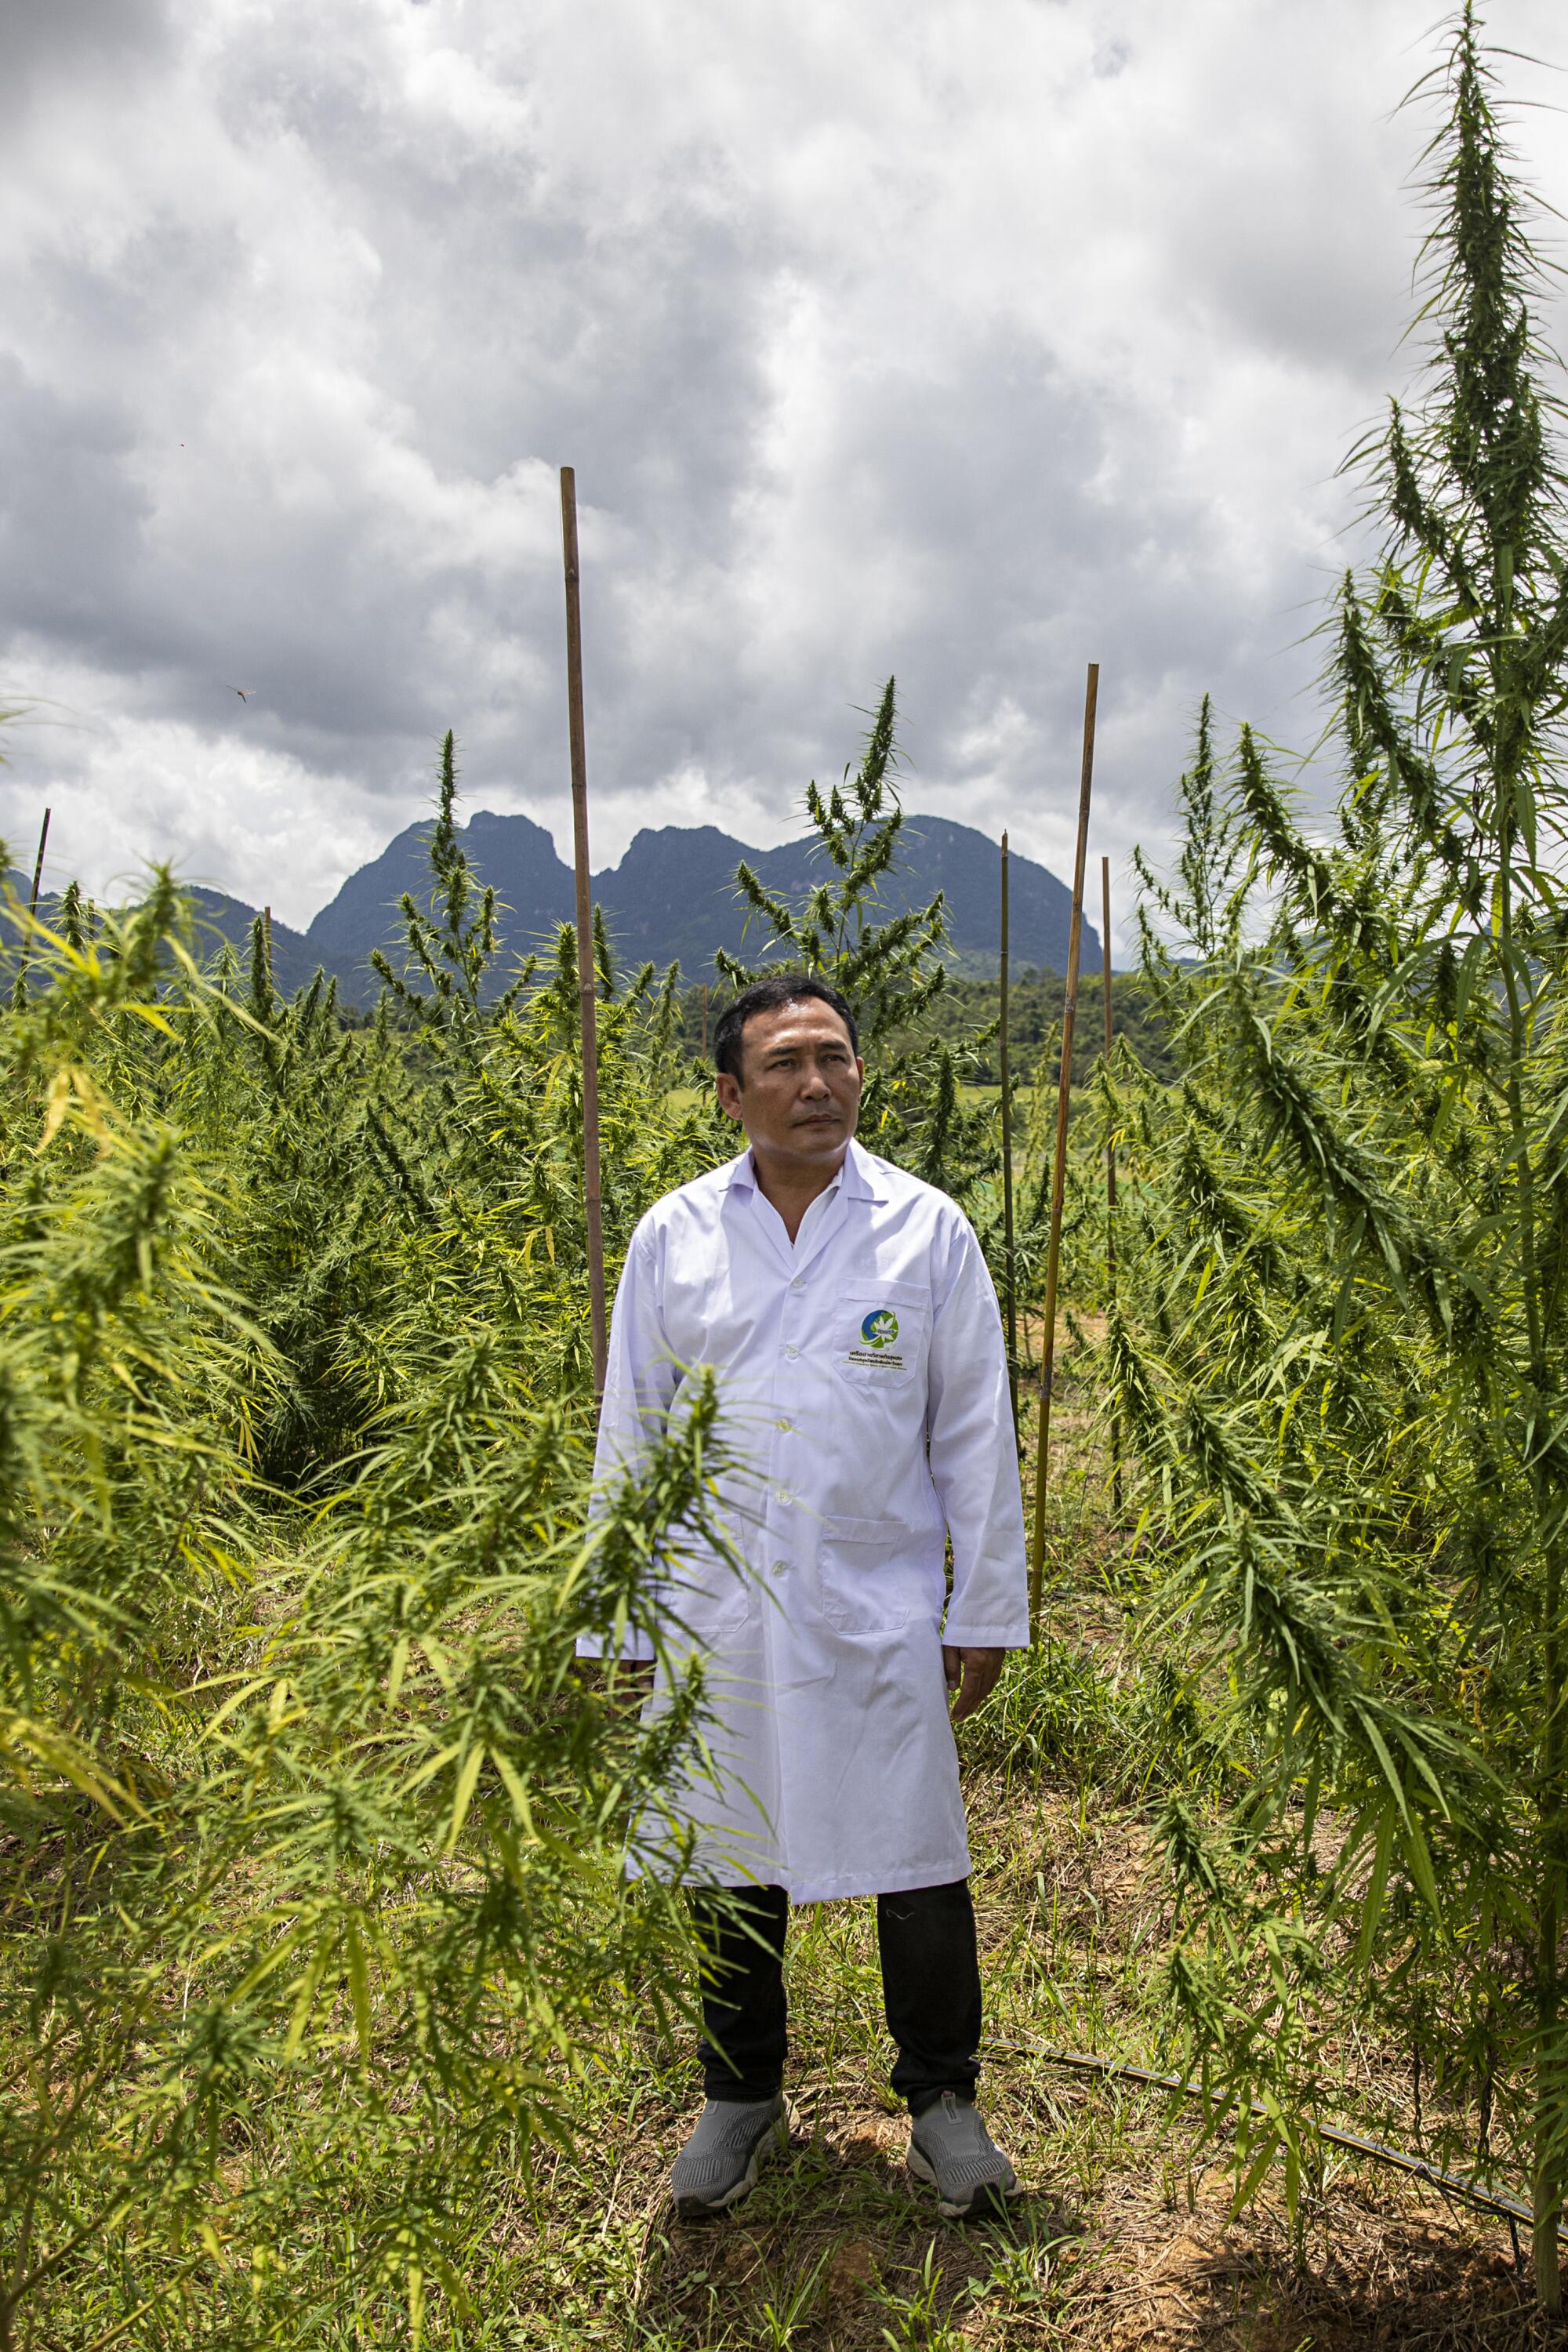 A man in a white lab coat standing outdoors in a field of tall weed plants with mountains in the background